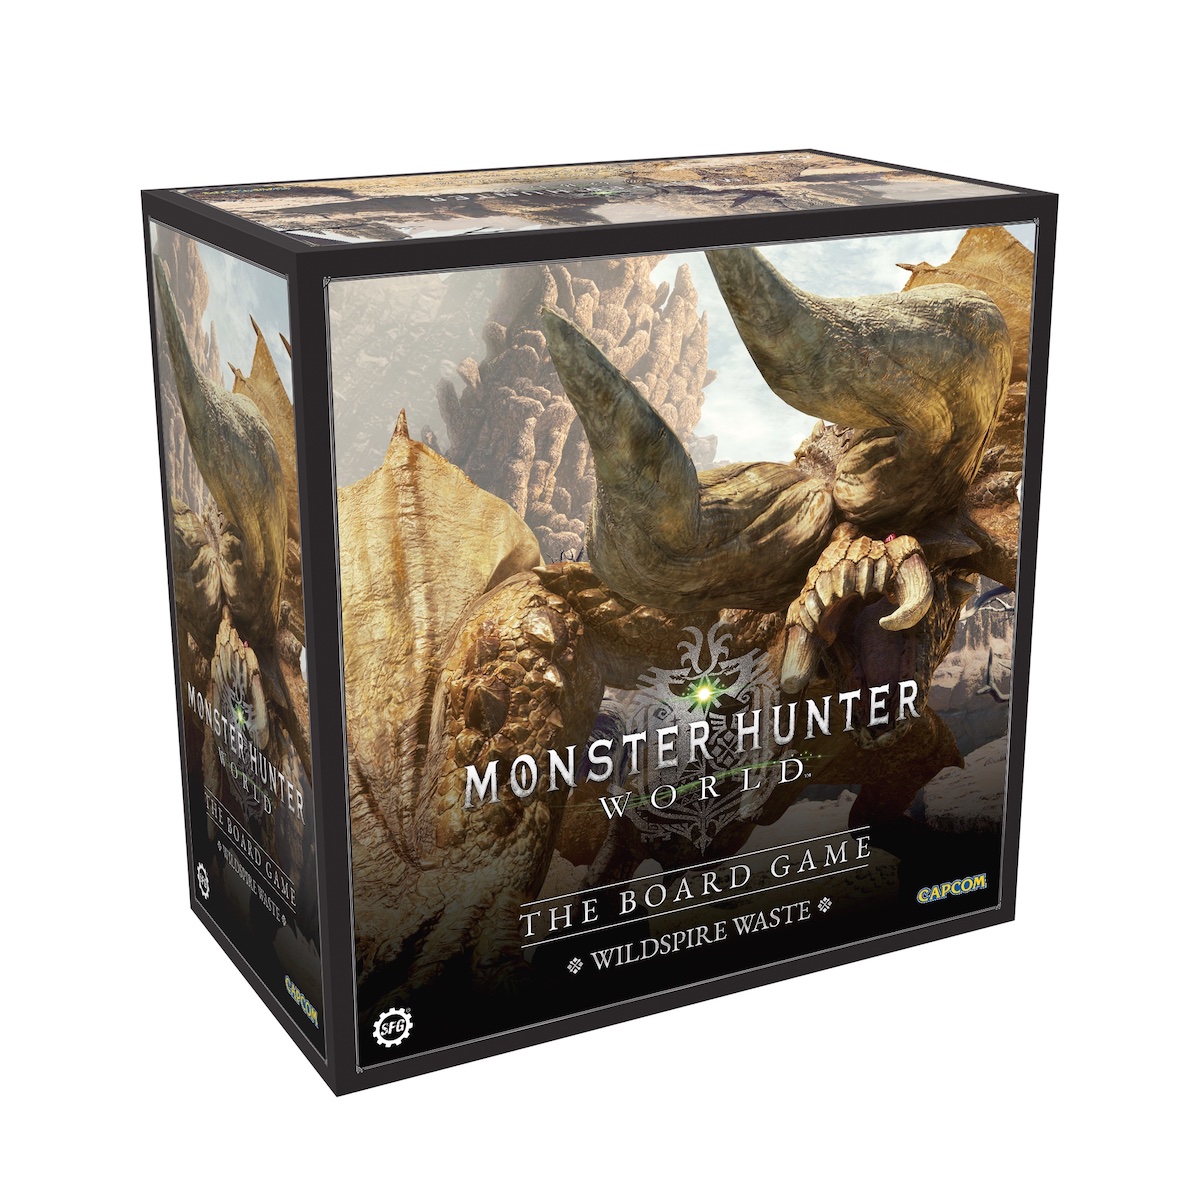 Monster Hunter World The Board Game Wildspire Waste Core Game image count 0